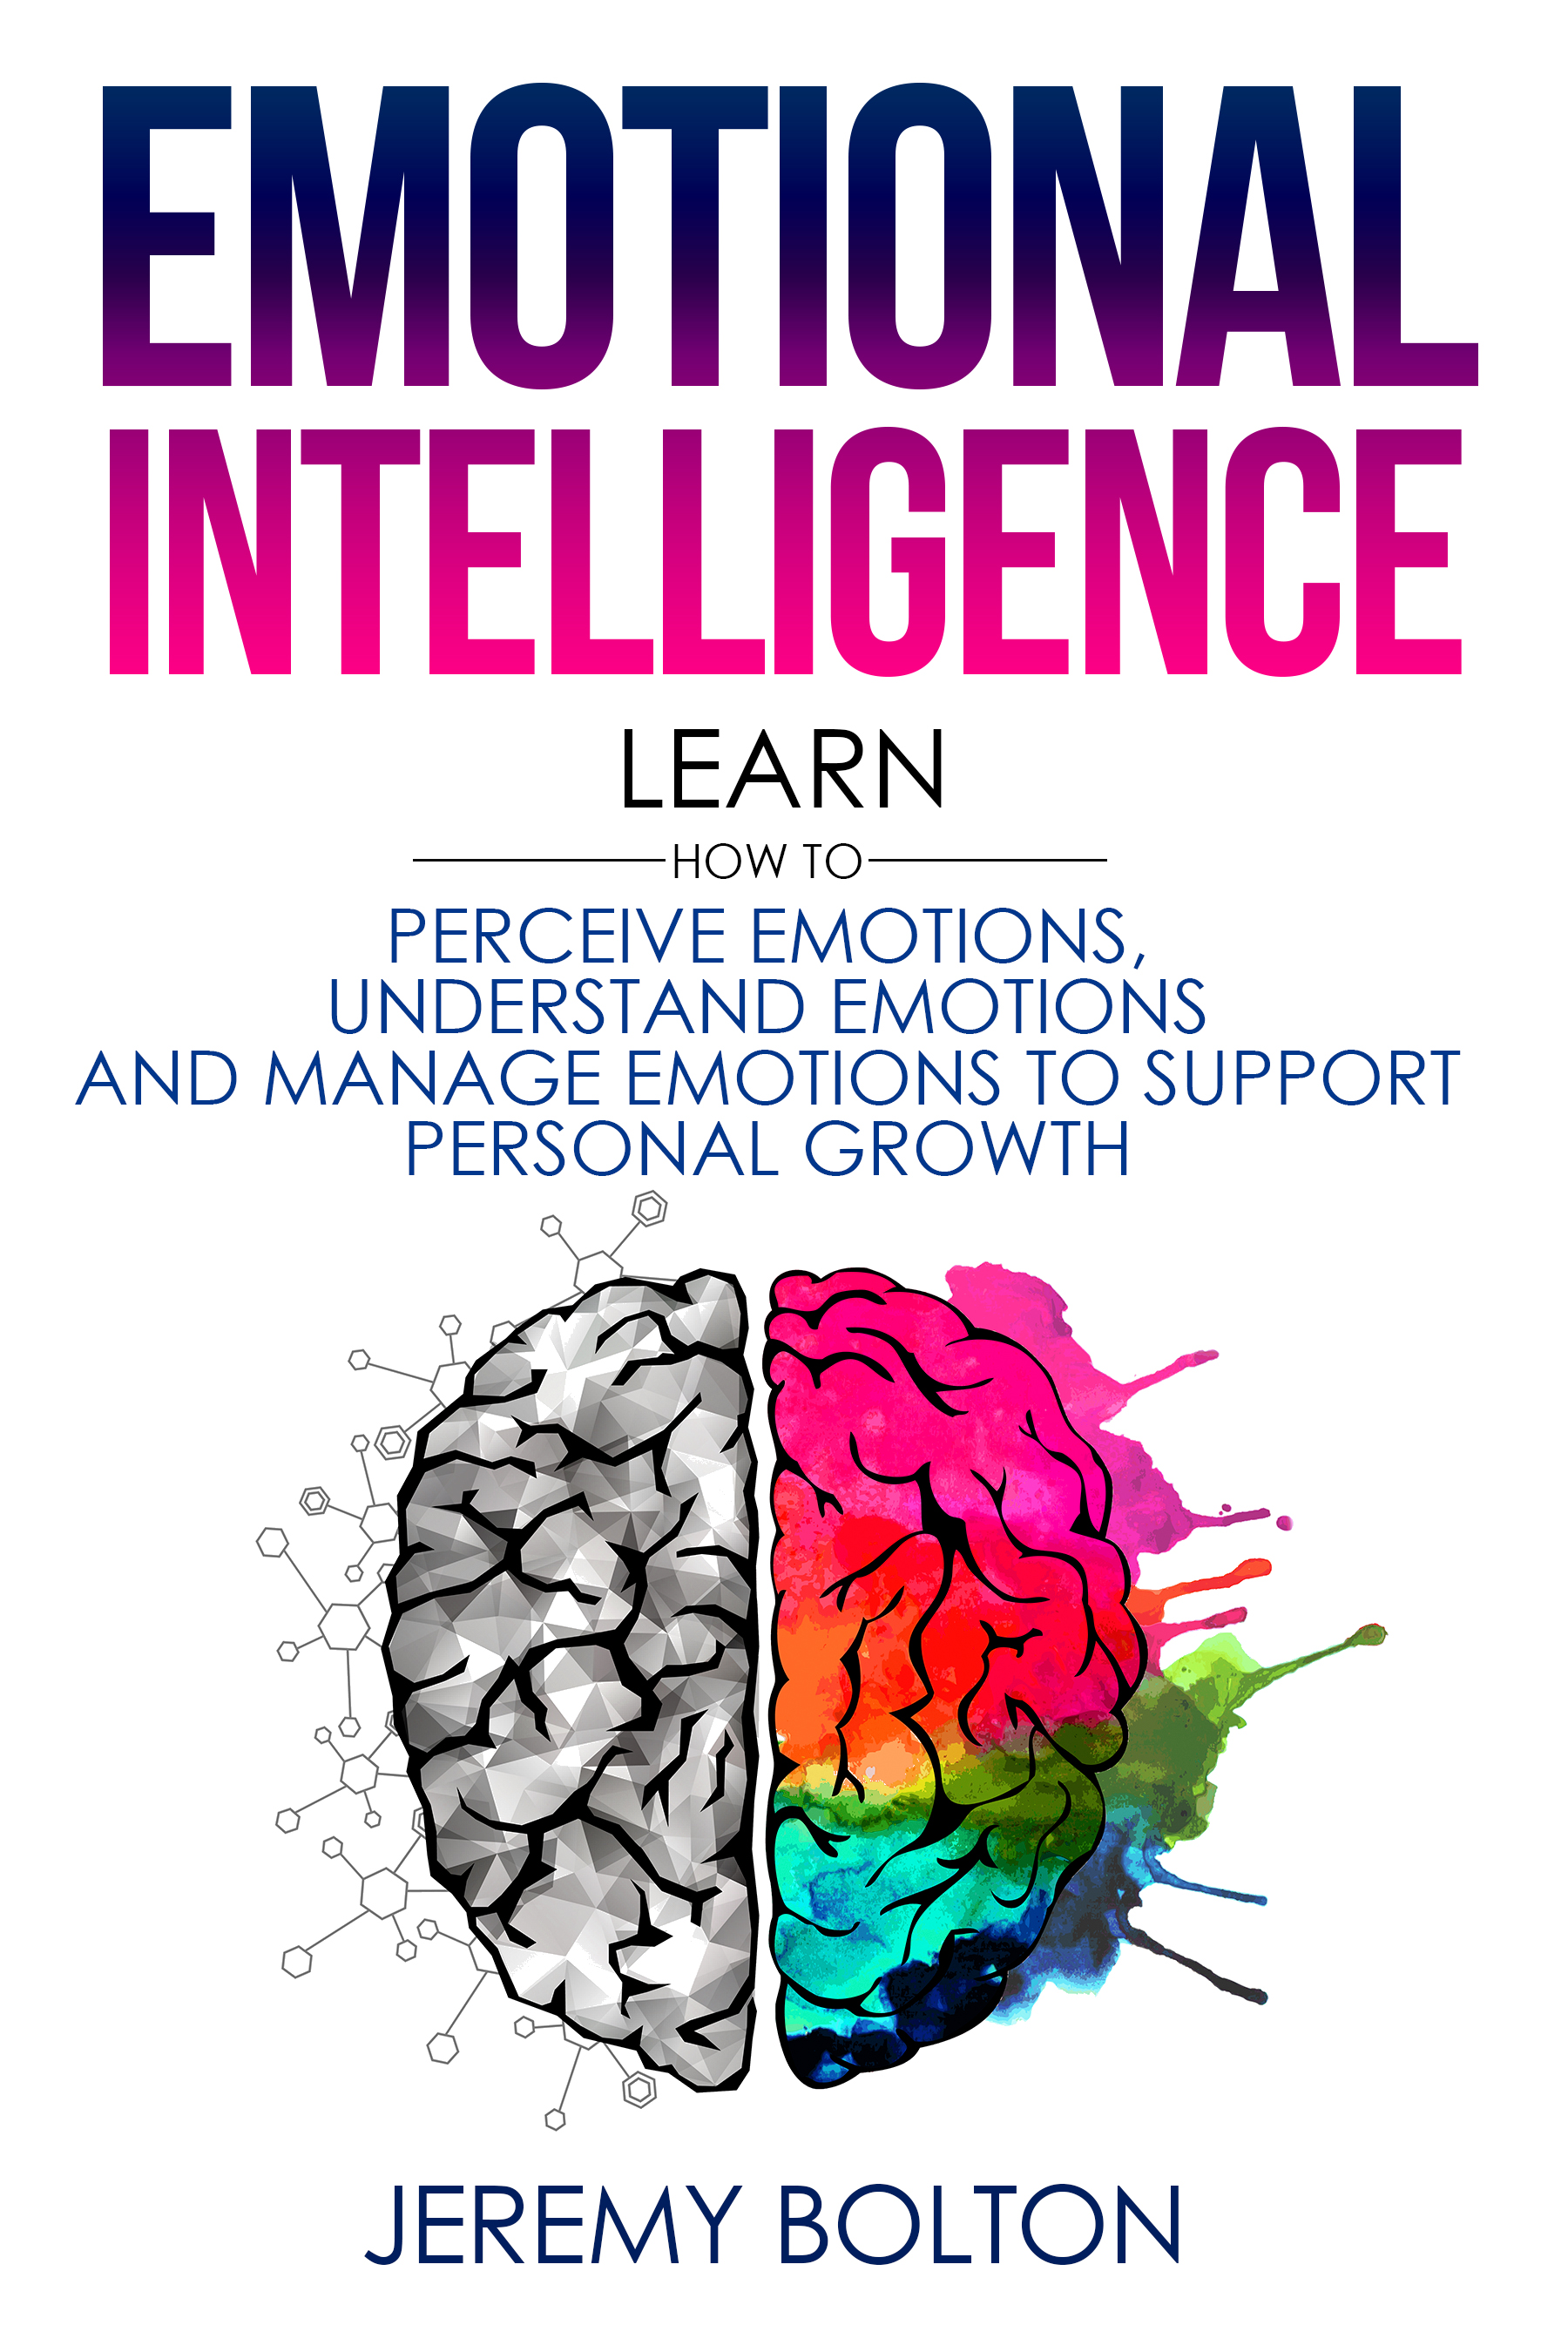 FREE: Emotional Intelligence: Learn How to Perceive Emotions, Understand Emotions, and Manage Emotions to Support Personal Growth (Book 2) by Jeremy Bolton